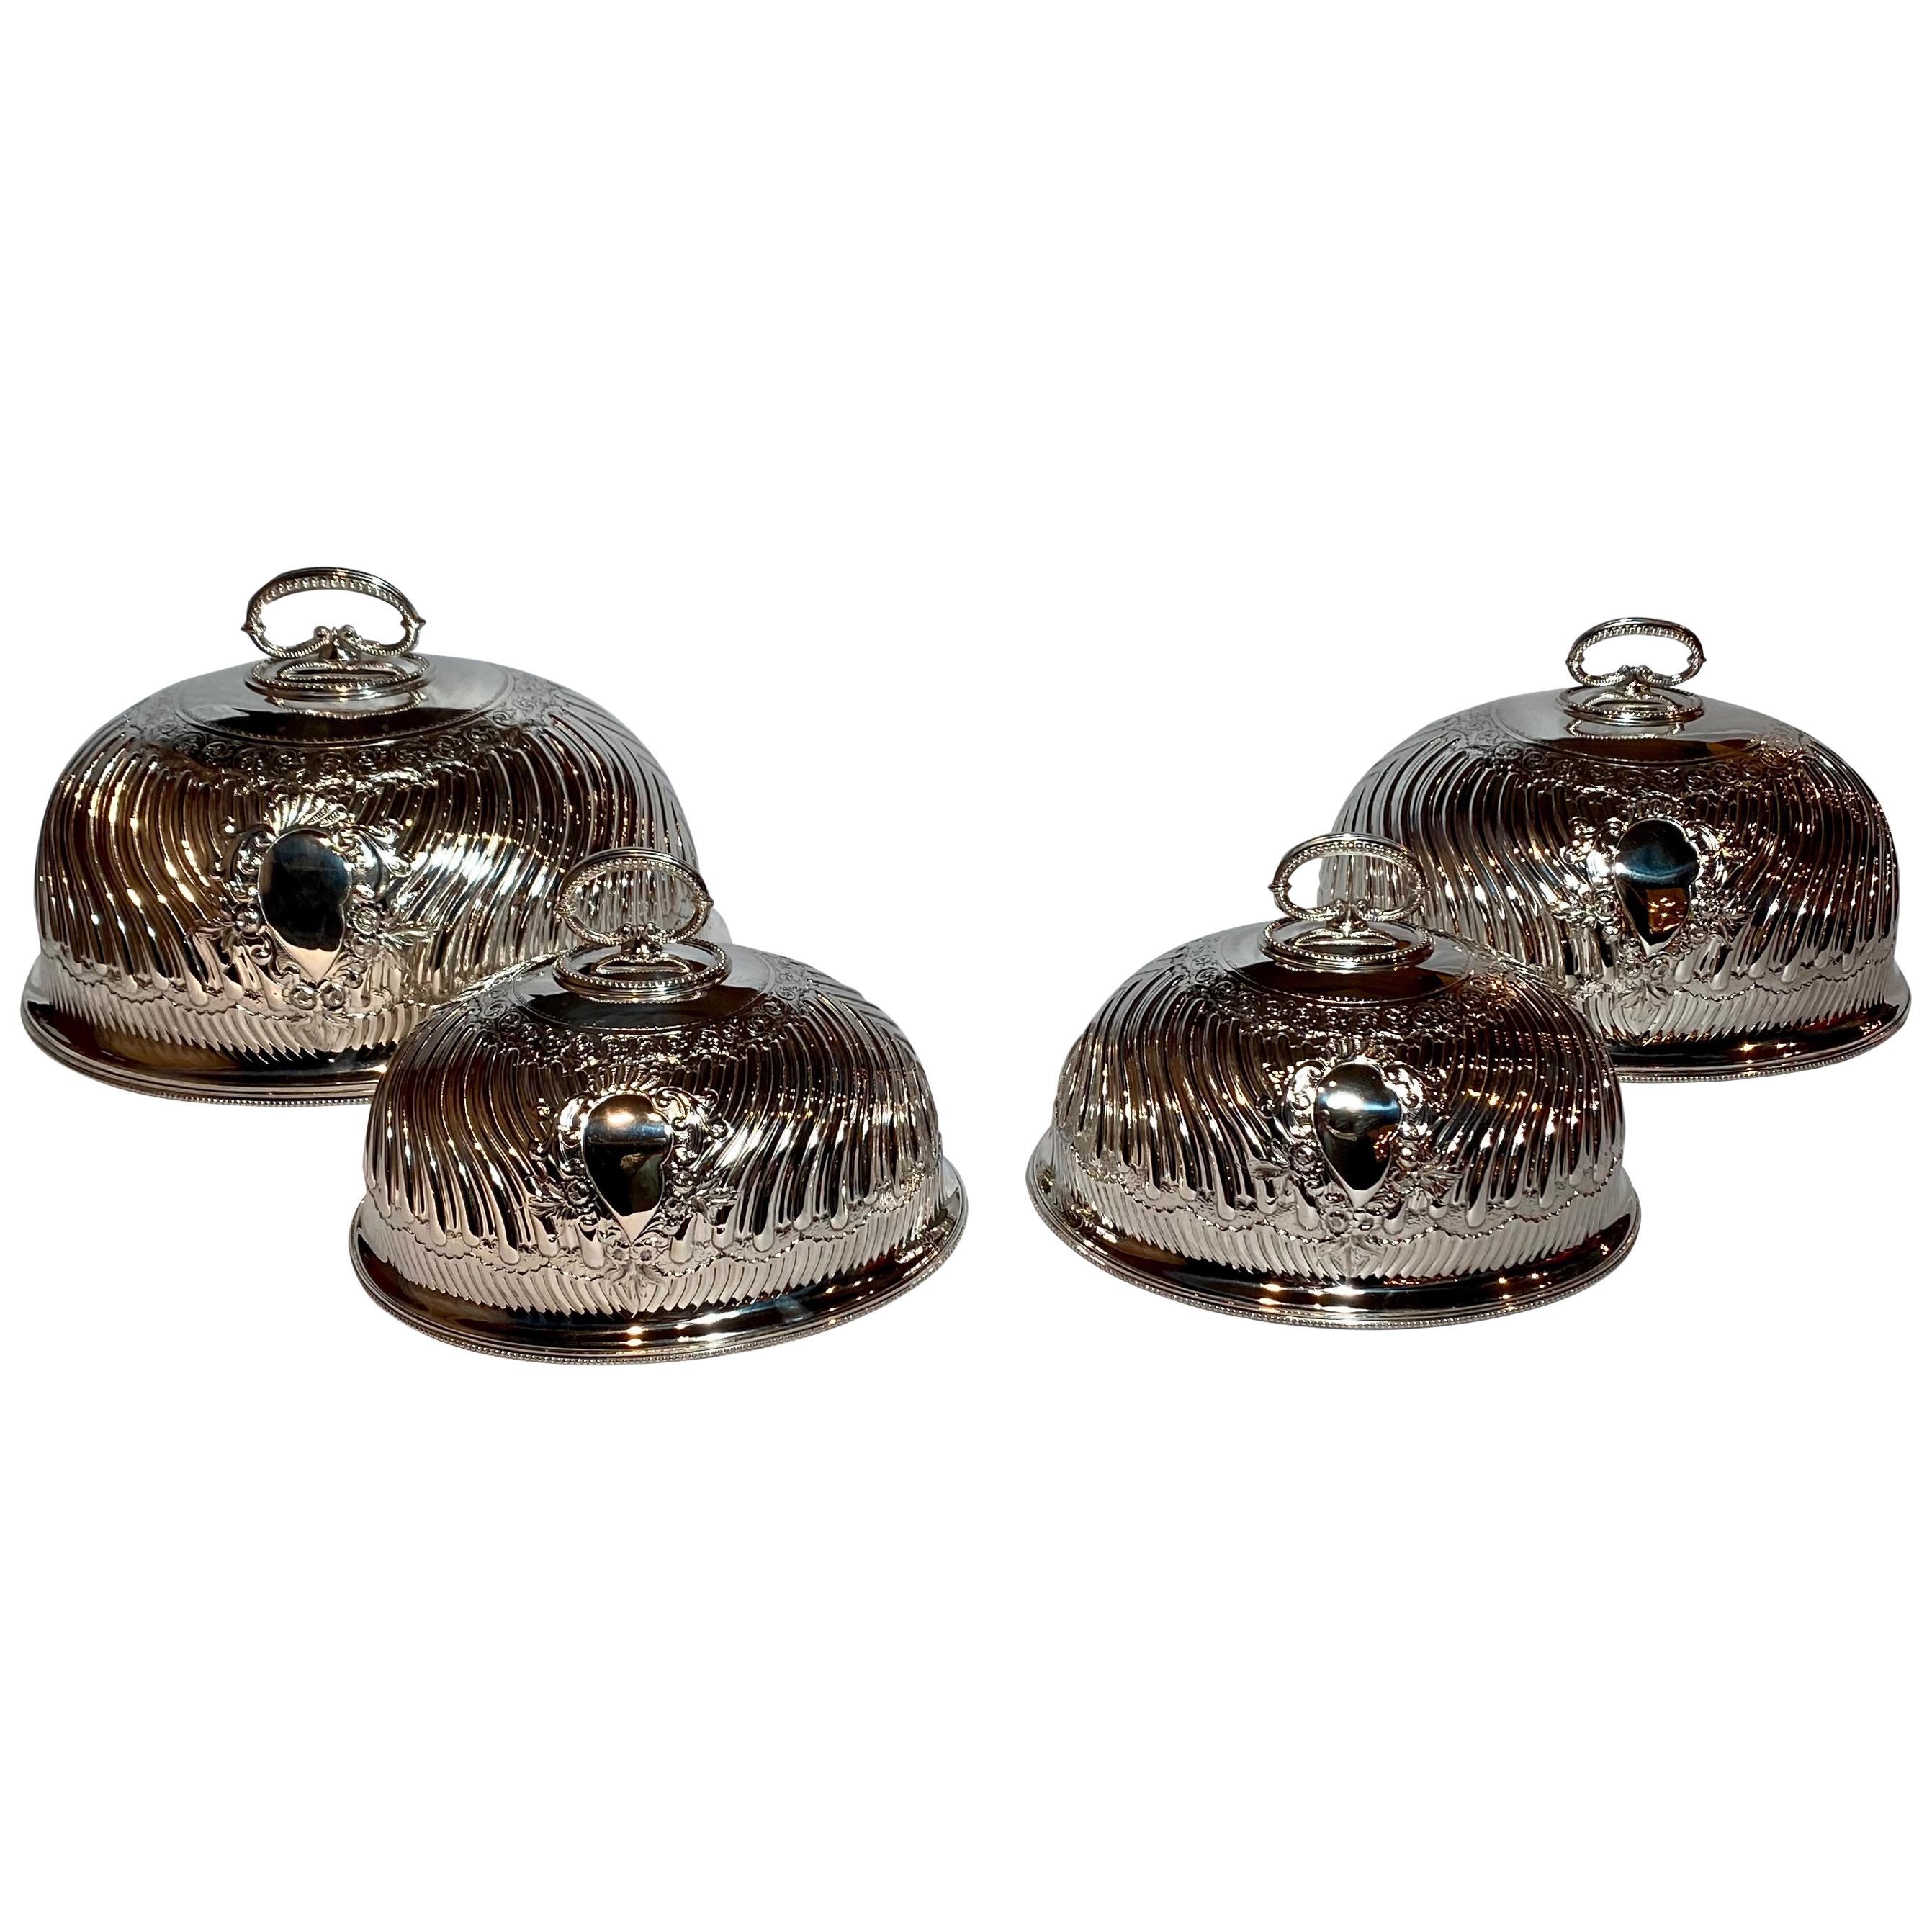 Set of Four Antique English Silver Plate Domes, circa 1880